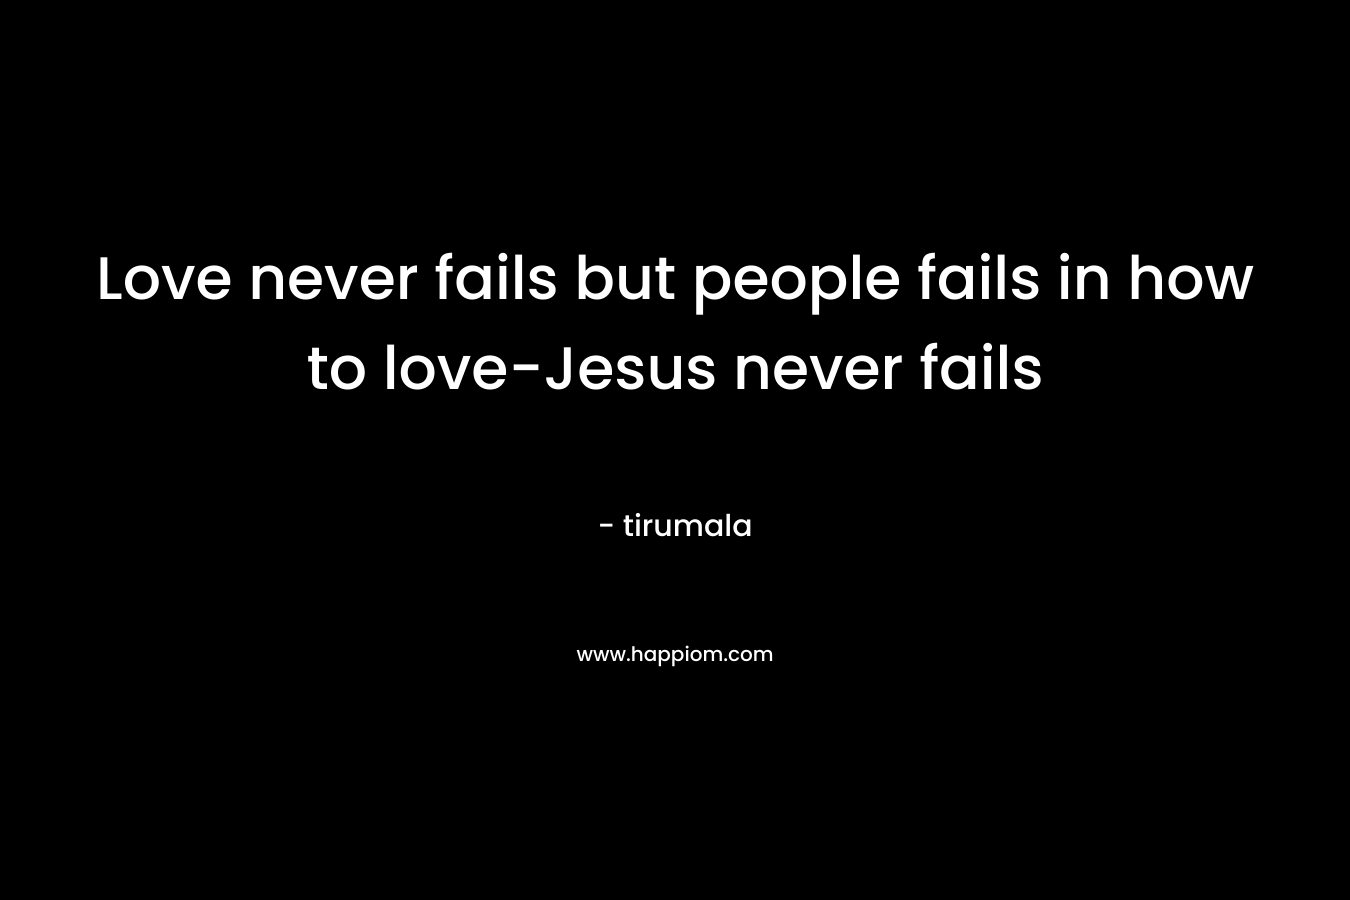 Love never fails but people fails in how to love-Jesus never fails